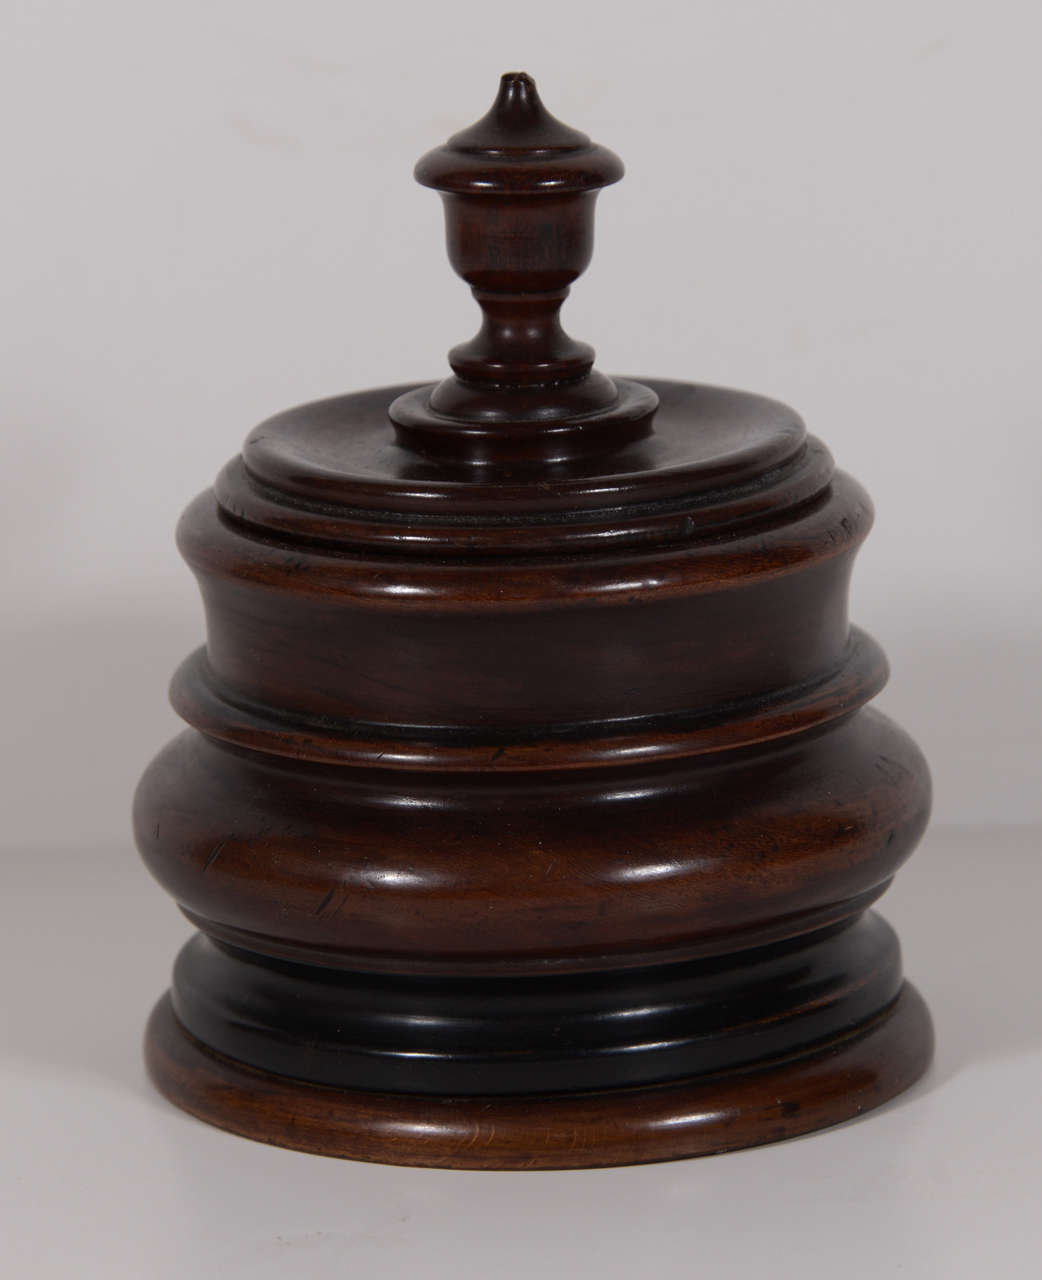 Wooden Dutch tobacco jar circa 1800s. Similar to the English's love for tea, the Dutch admired the product grown in their colonies, tobacco. The English were well known for their beautiful and decorative tea caddies and the Dutch were known for